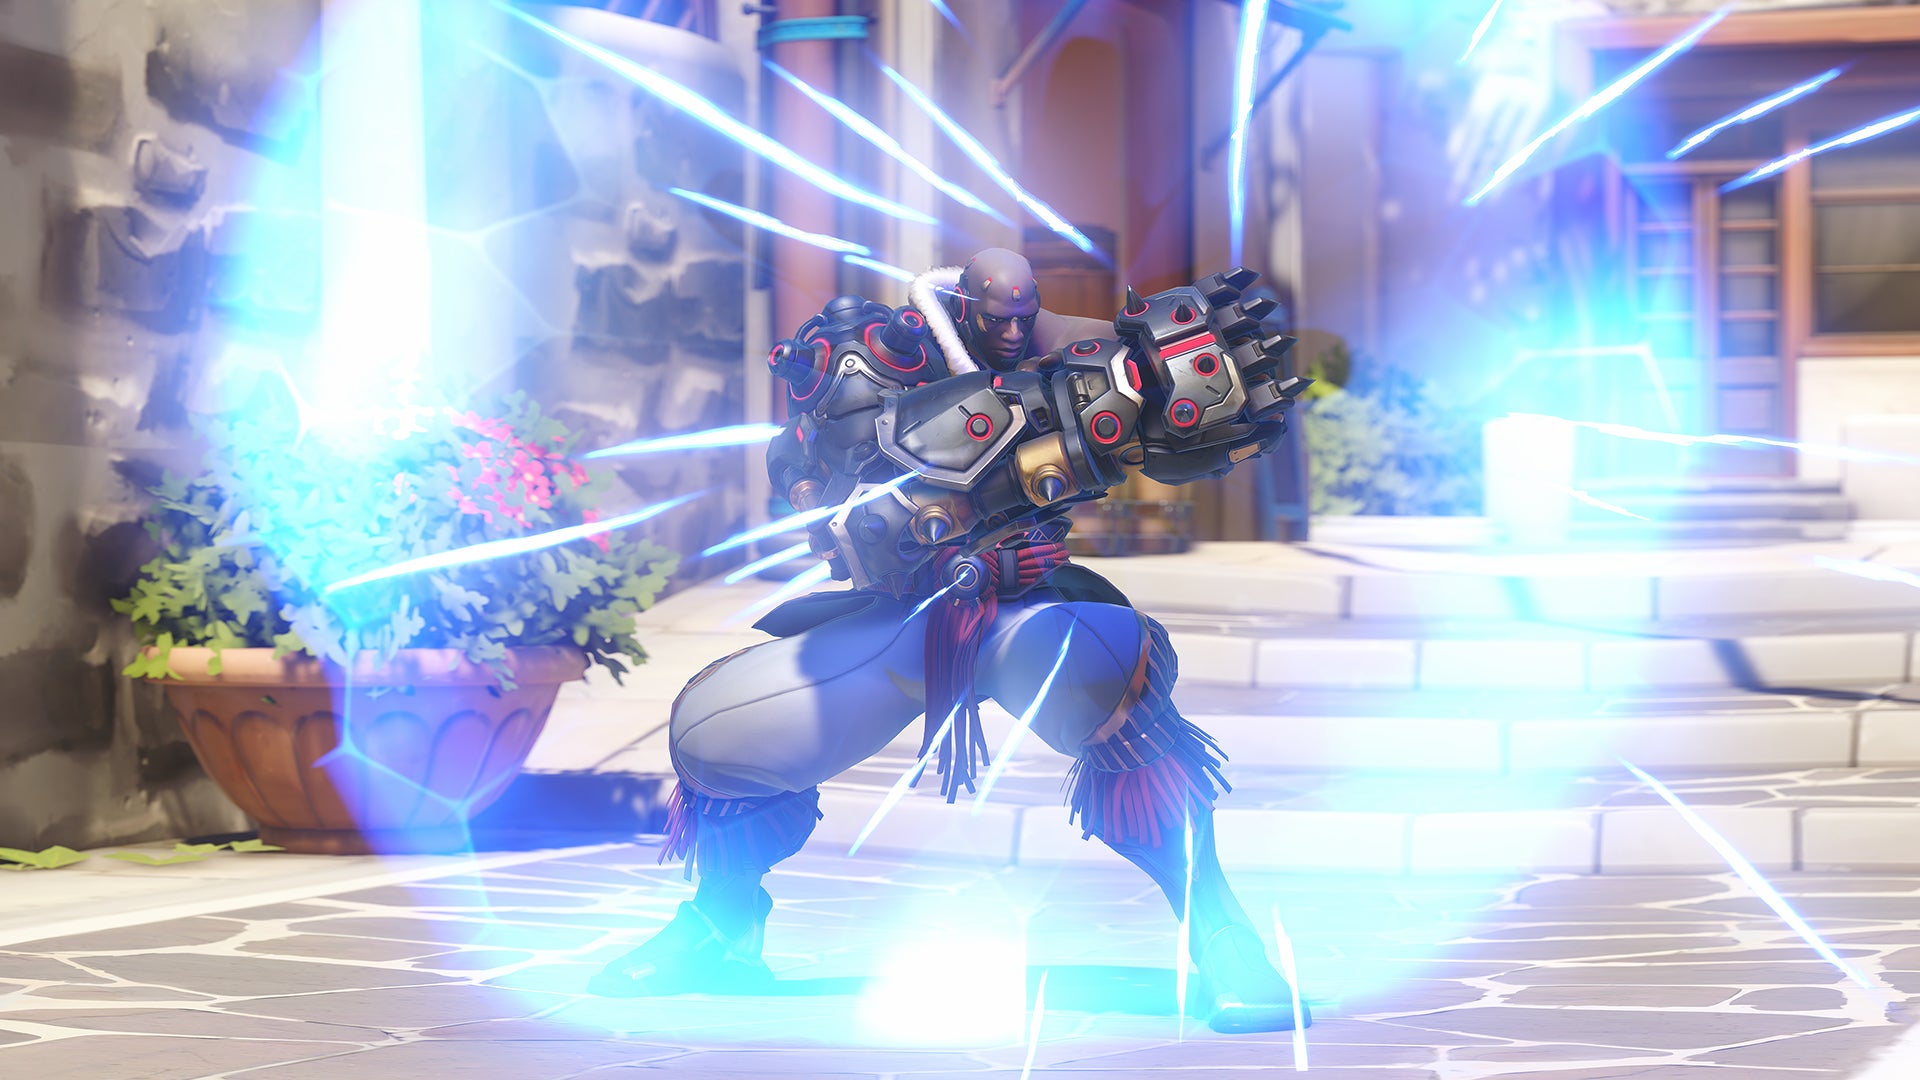 Doomfist, a hero in Overwatch 2, stands in front of the camera using his Power Block shield to deflect attacks.